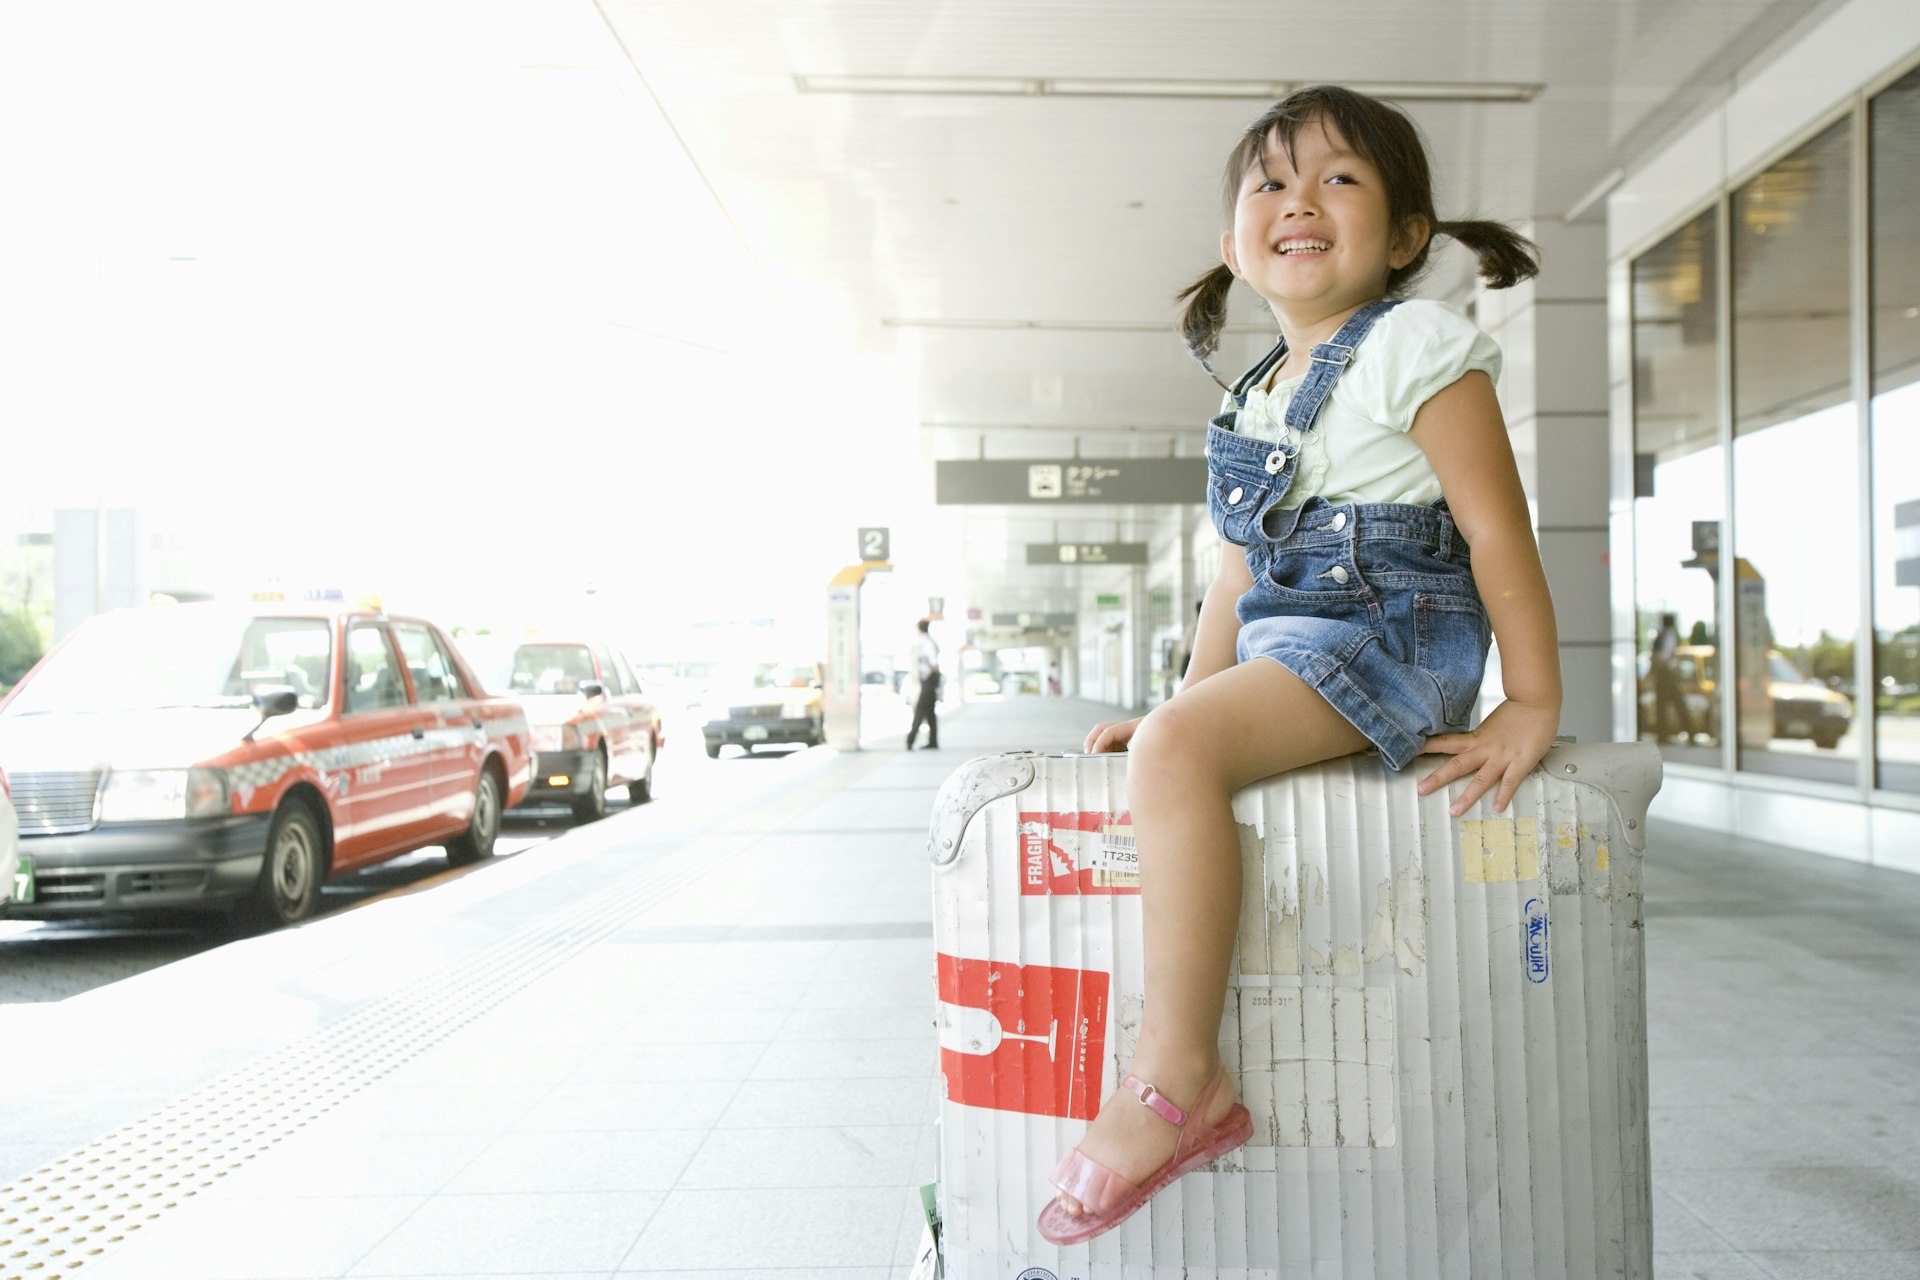 A girl rides suitcase by cabstand in airport in Japan 